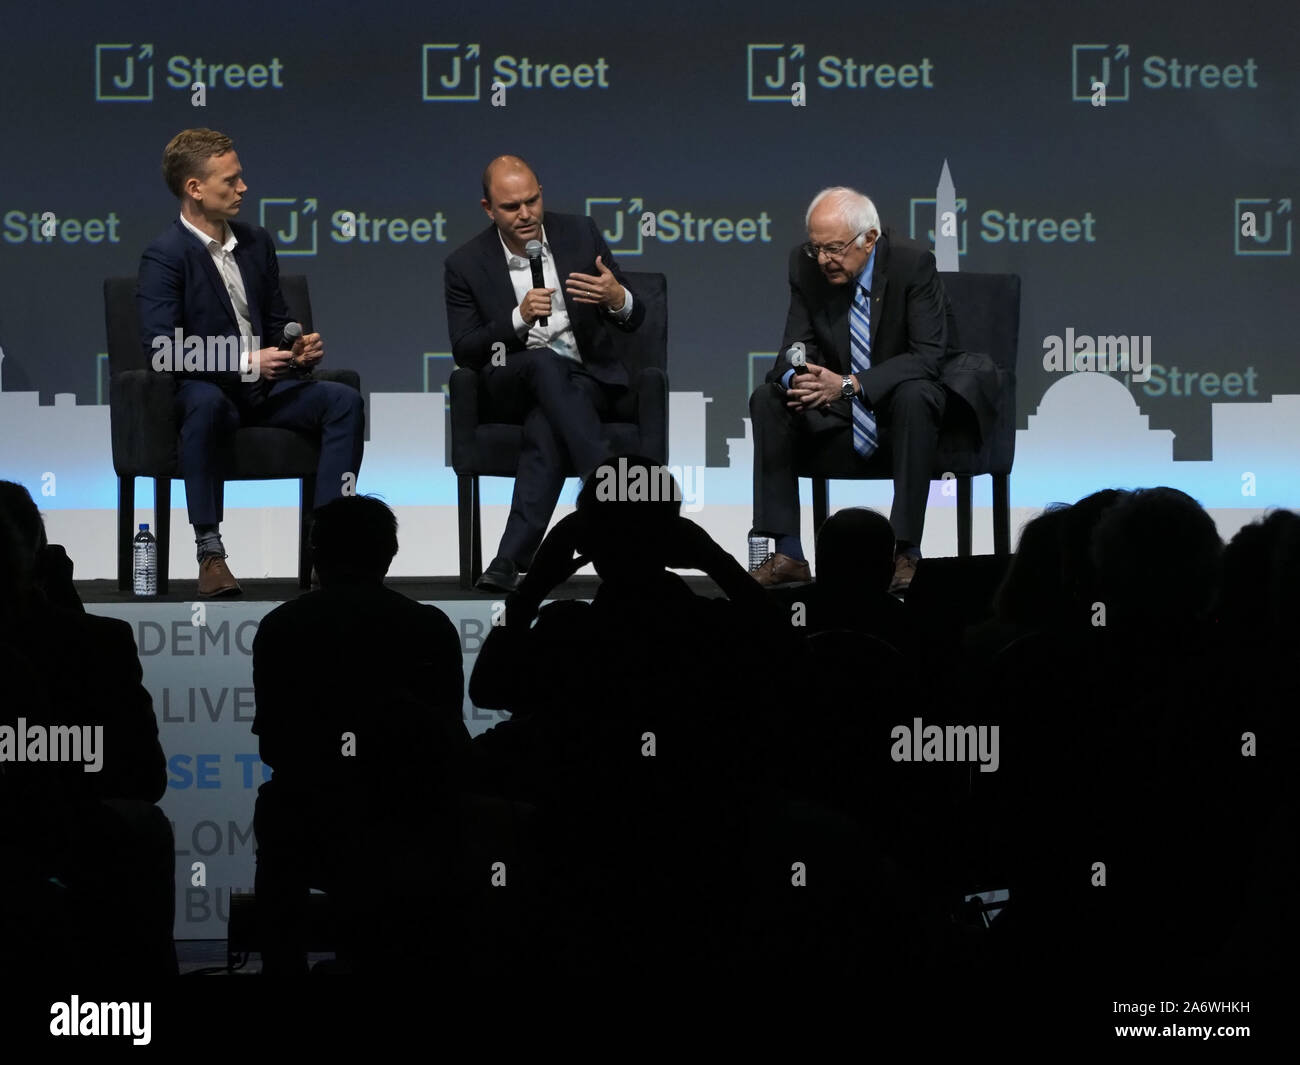 Washington DC, USA. 28th Oct, 2019. 2020 Democratic presidential candidate Senator Bernie Sanders addresses the J Street National Conference. He is interviewed by Pod Save the WorldÃs hosts Ã‘ former White House National Security Council spokesman Tommy Vietor and former Deputy National Security Advisor Ben Rhodes Ã‘ about the US-Israel relationship, the Israeli-Palestinian conflict and the future of US foreign policy. Credit: Sue Dorfman/ZUMA Wire/Alamy Live News Stock Photo